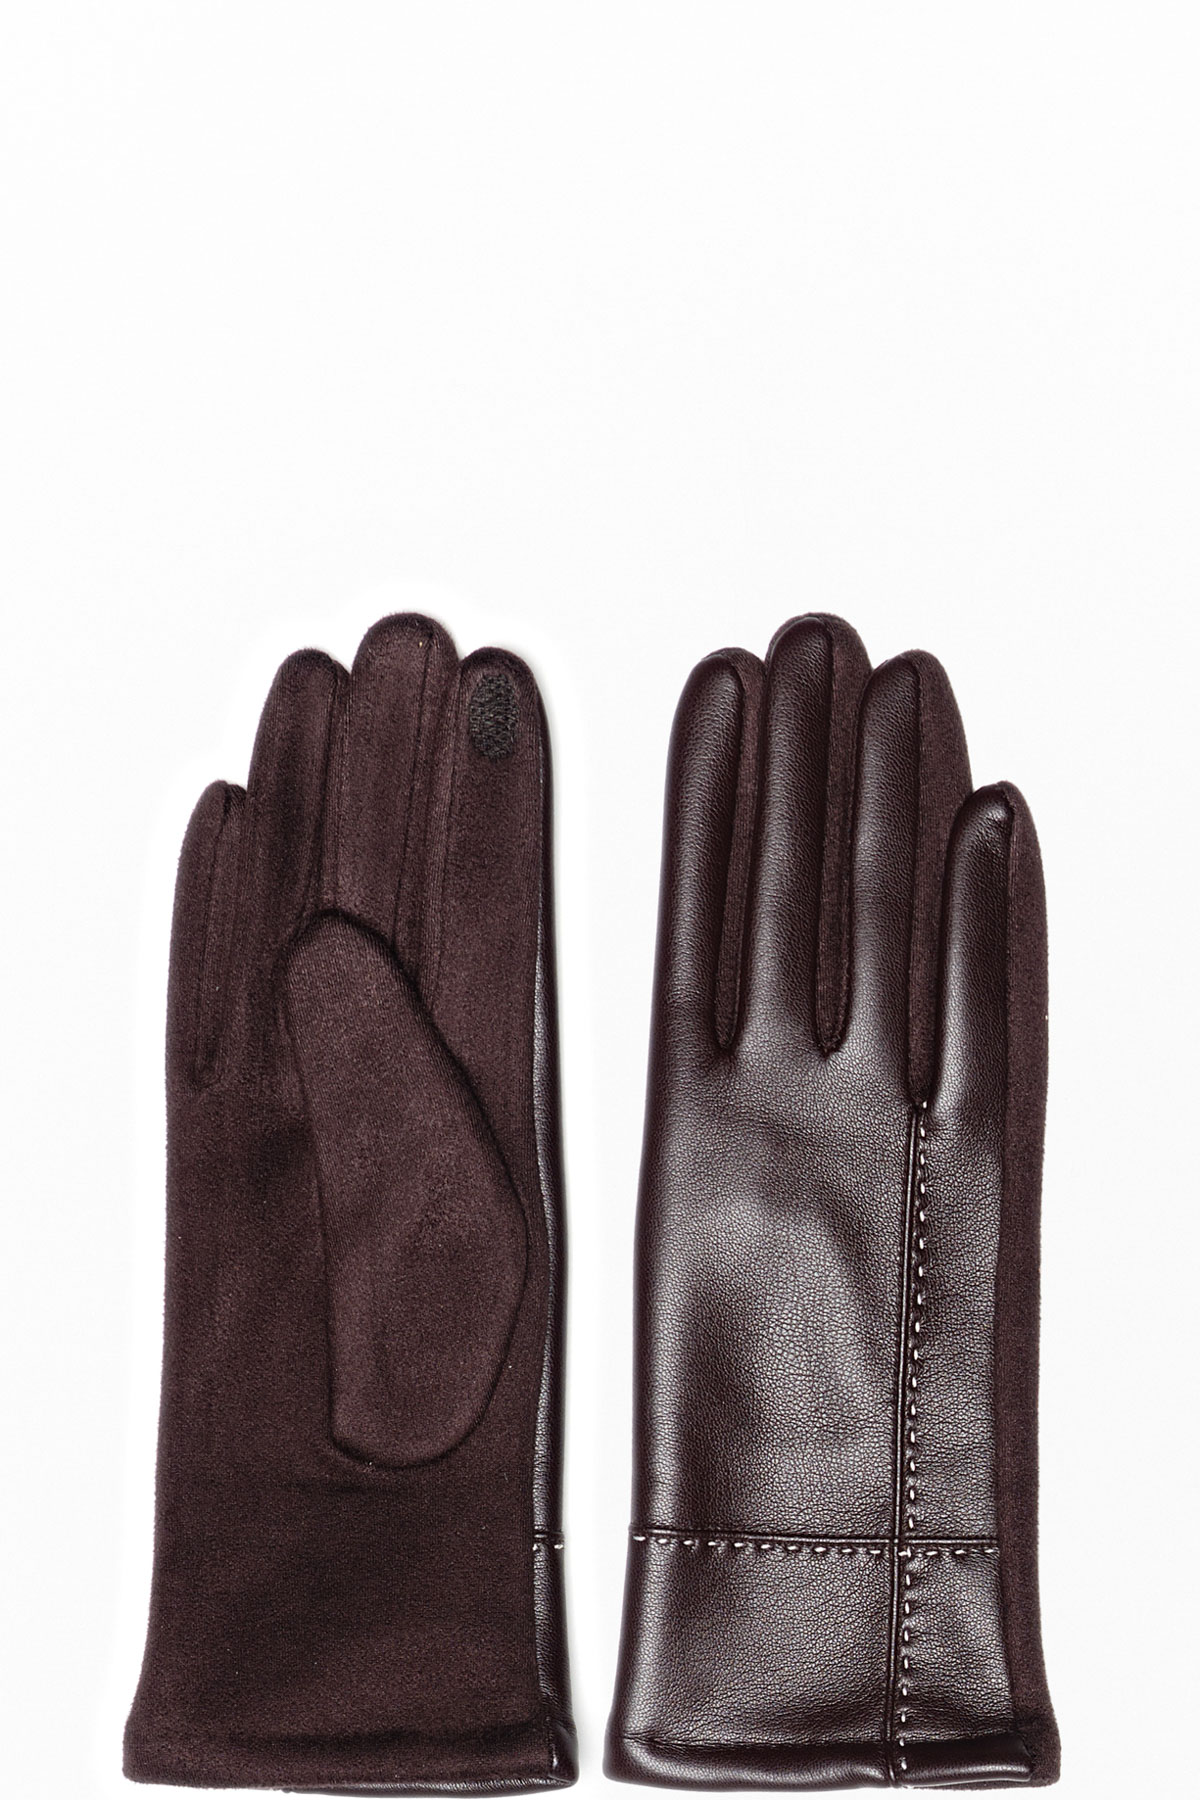 FAUX LEATHER SPANDEX TOUCH SCREEN GLOVE